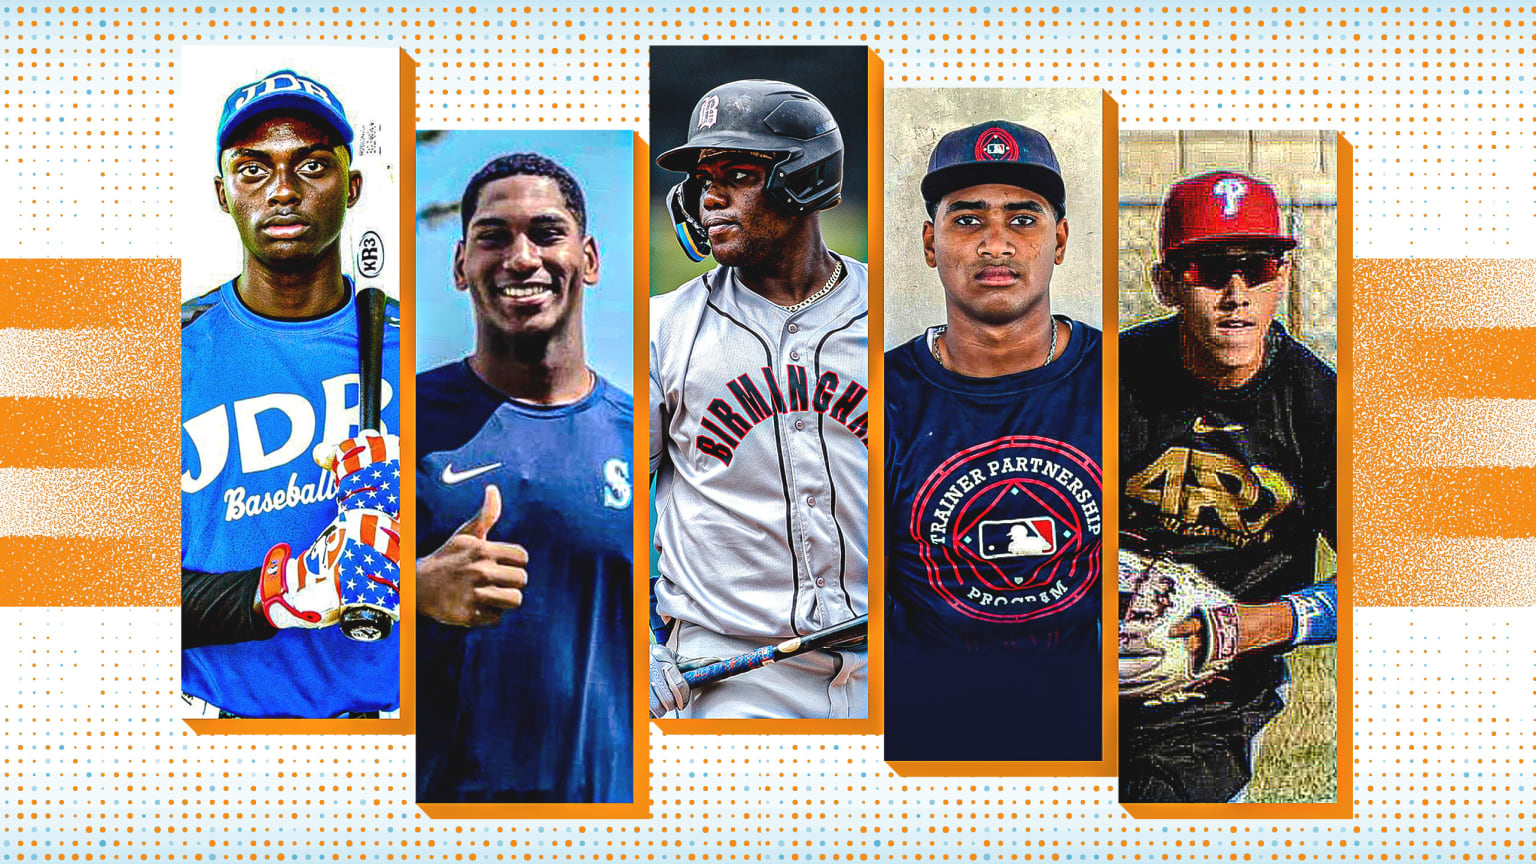 5 prospects arranged in narrow vertical rectangles over an orange-and-white background